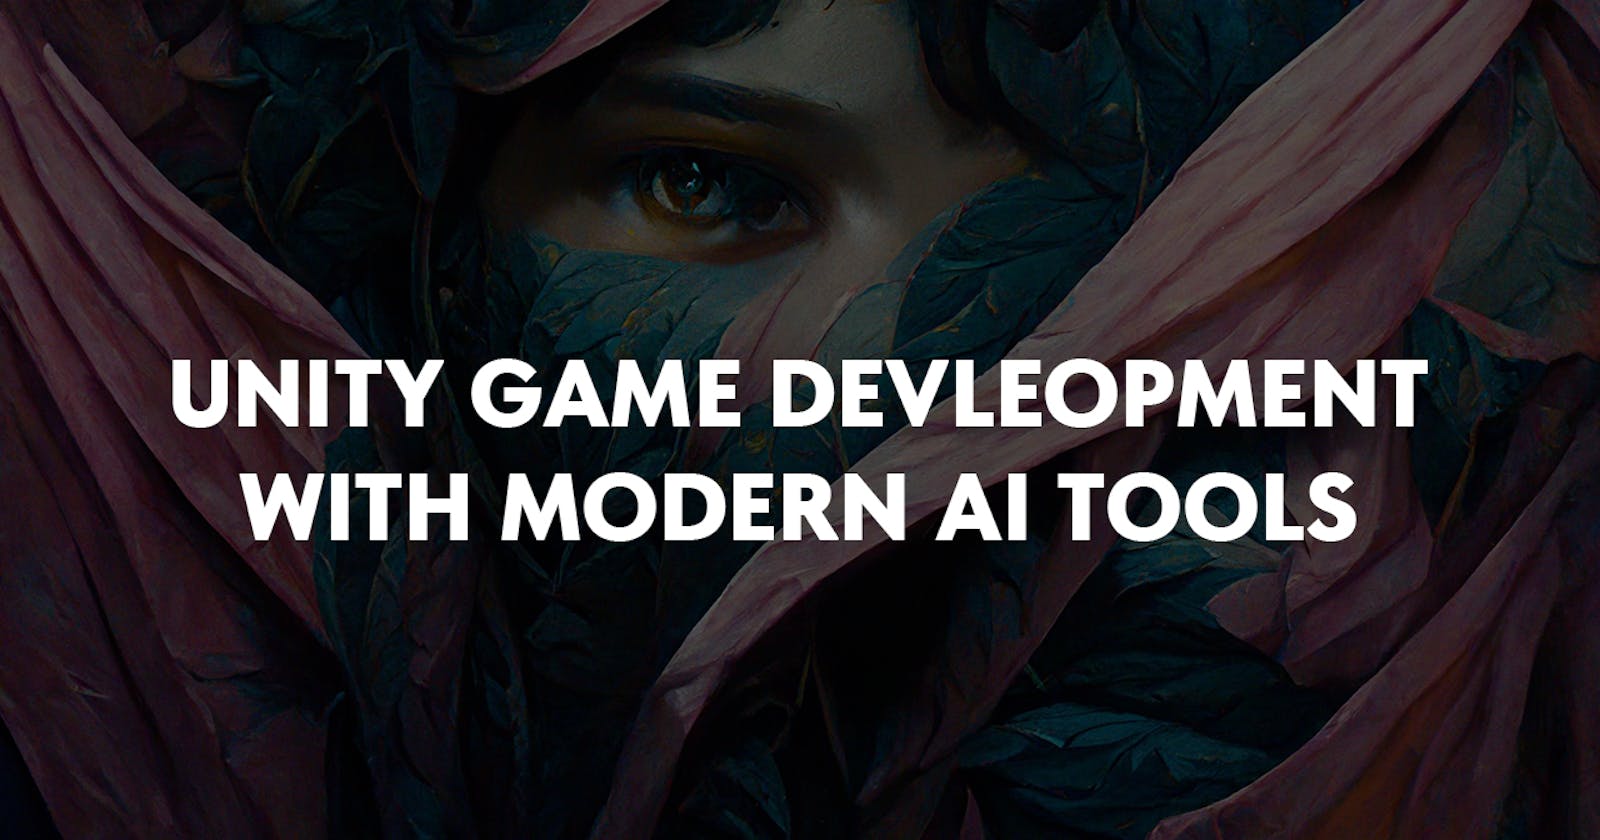 How AI can help you in game development - useful resources on using neural networks in game development on Unity